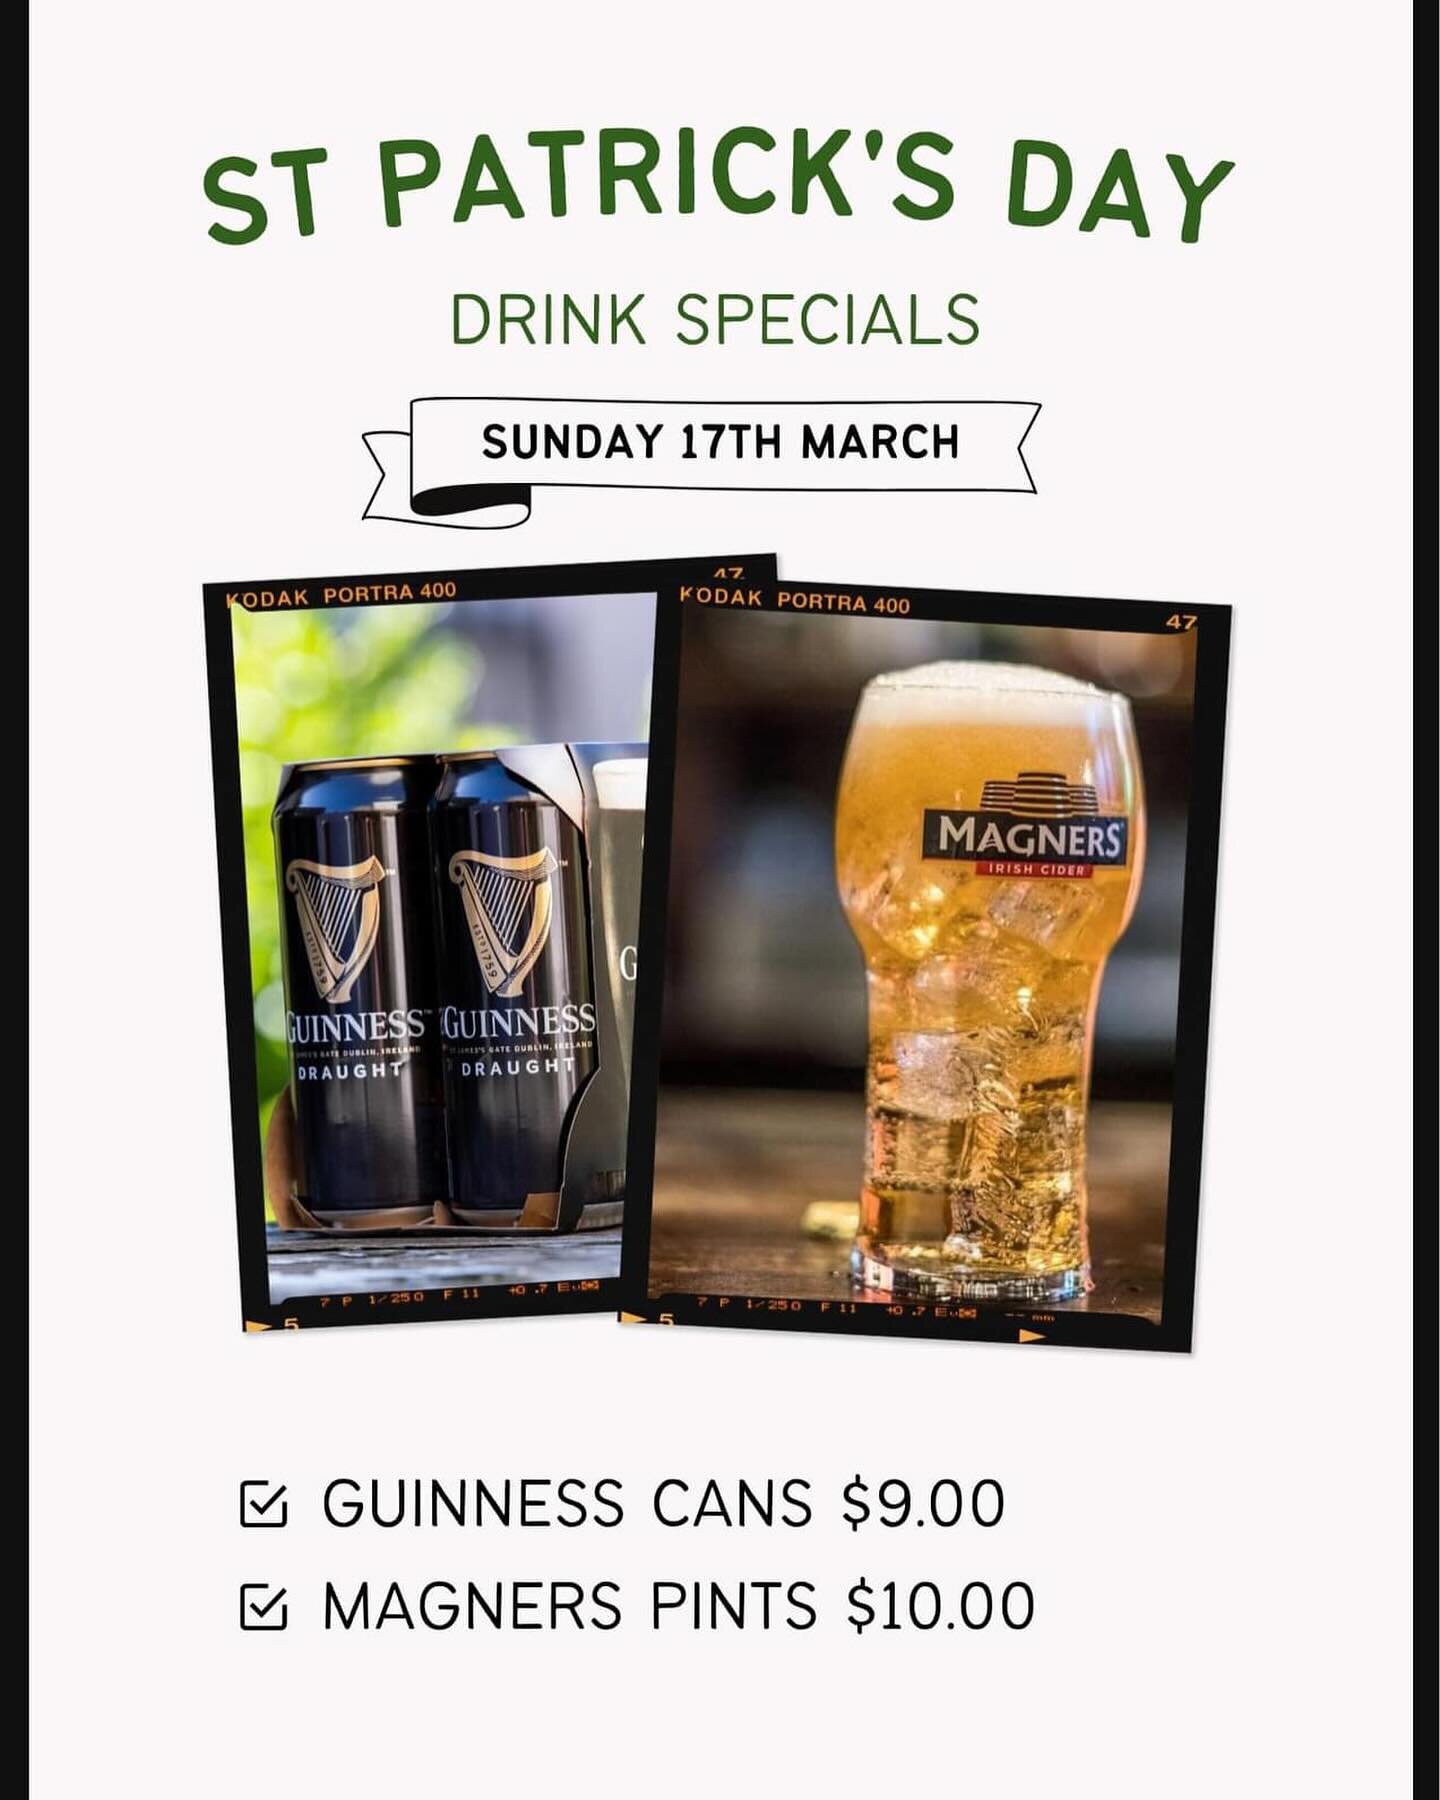 Happy St Patrick&rsquo;s Day ☘️
Open from 12pm-9pm for lunch &amp; dinner 🥘 🍺

$10 Magners Cider Pints
$9 Guinness Cans